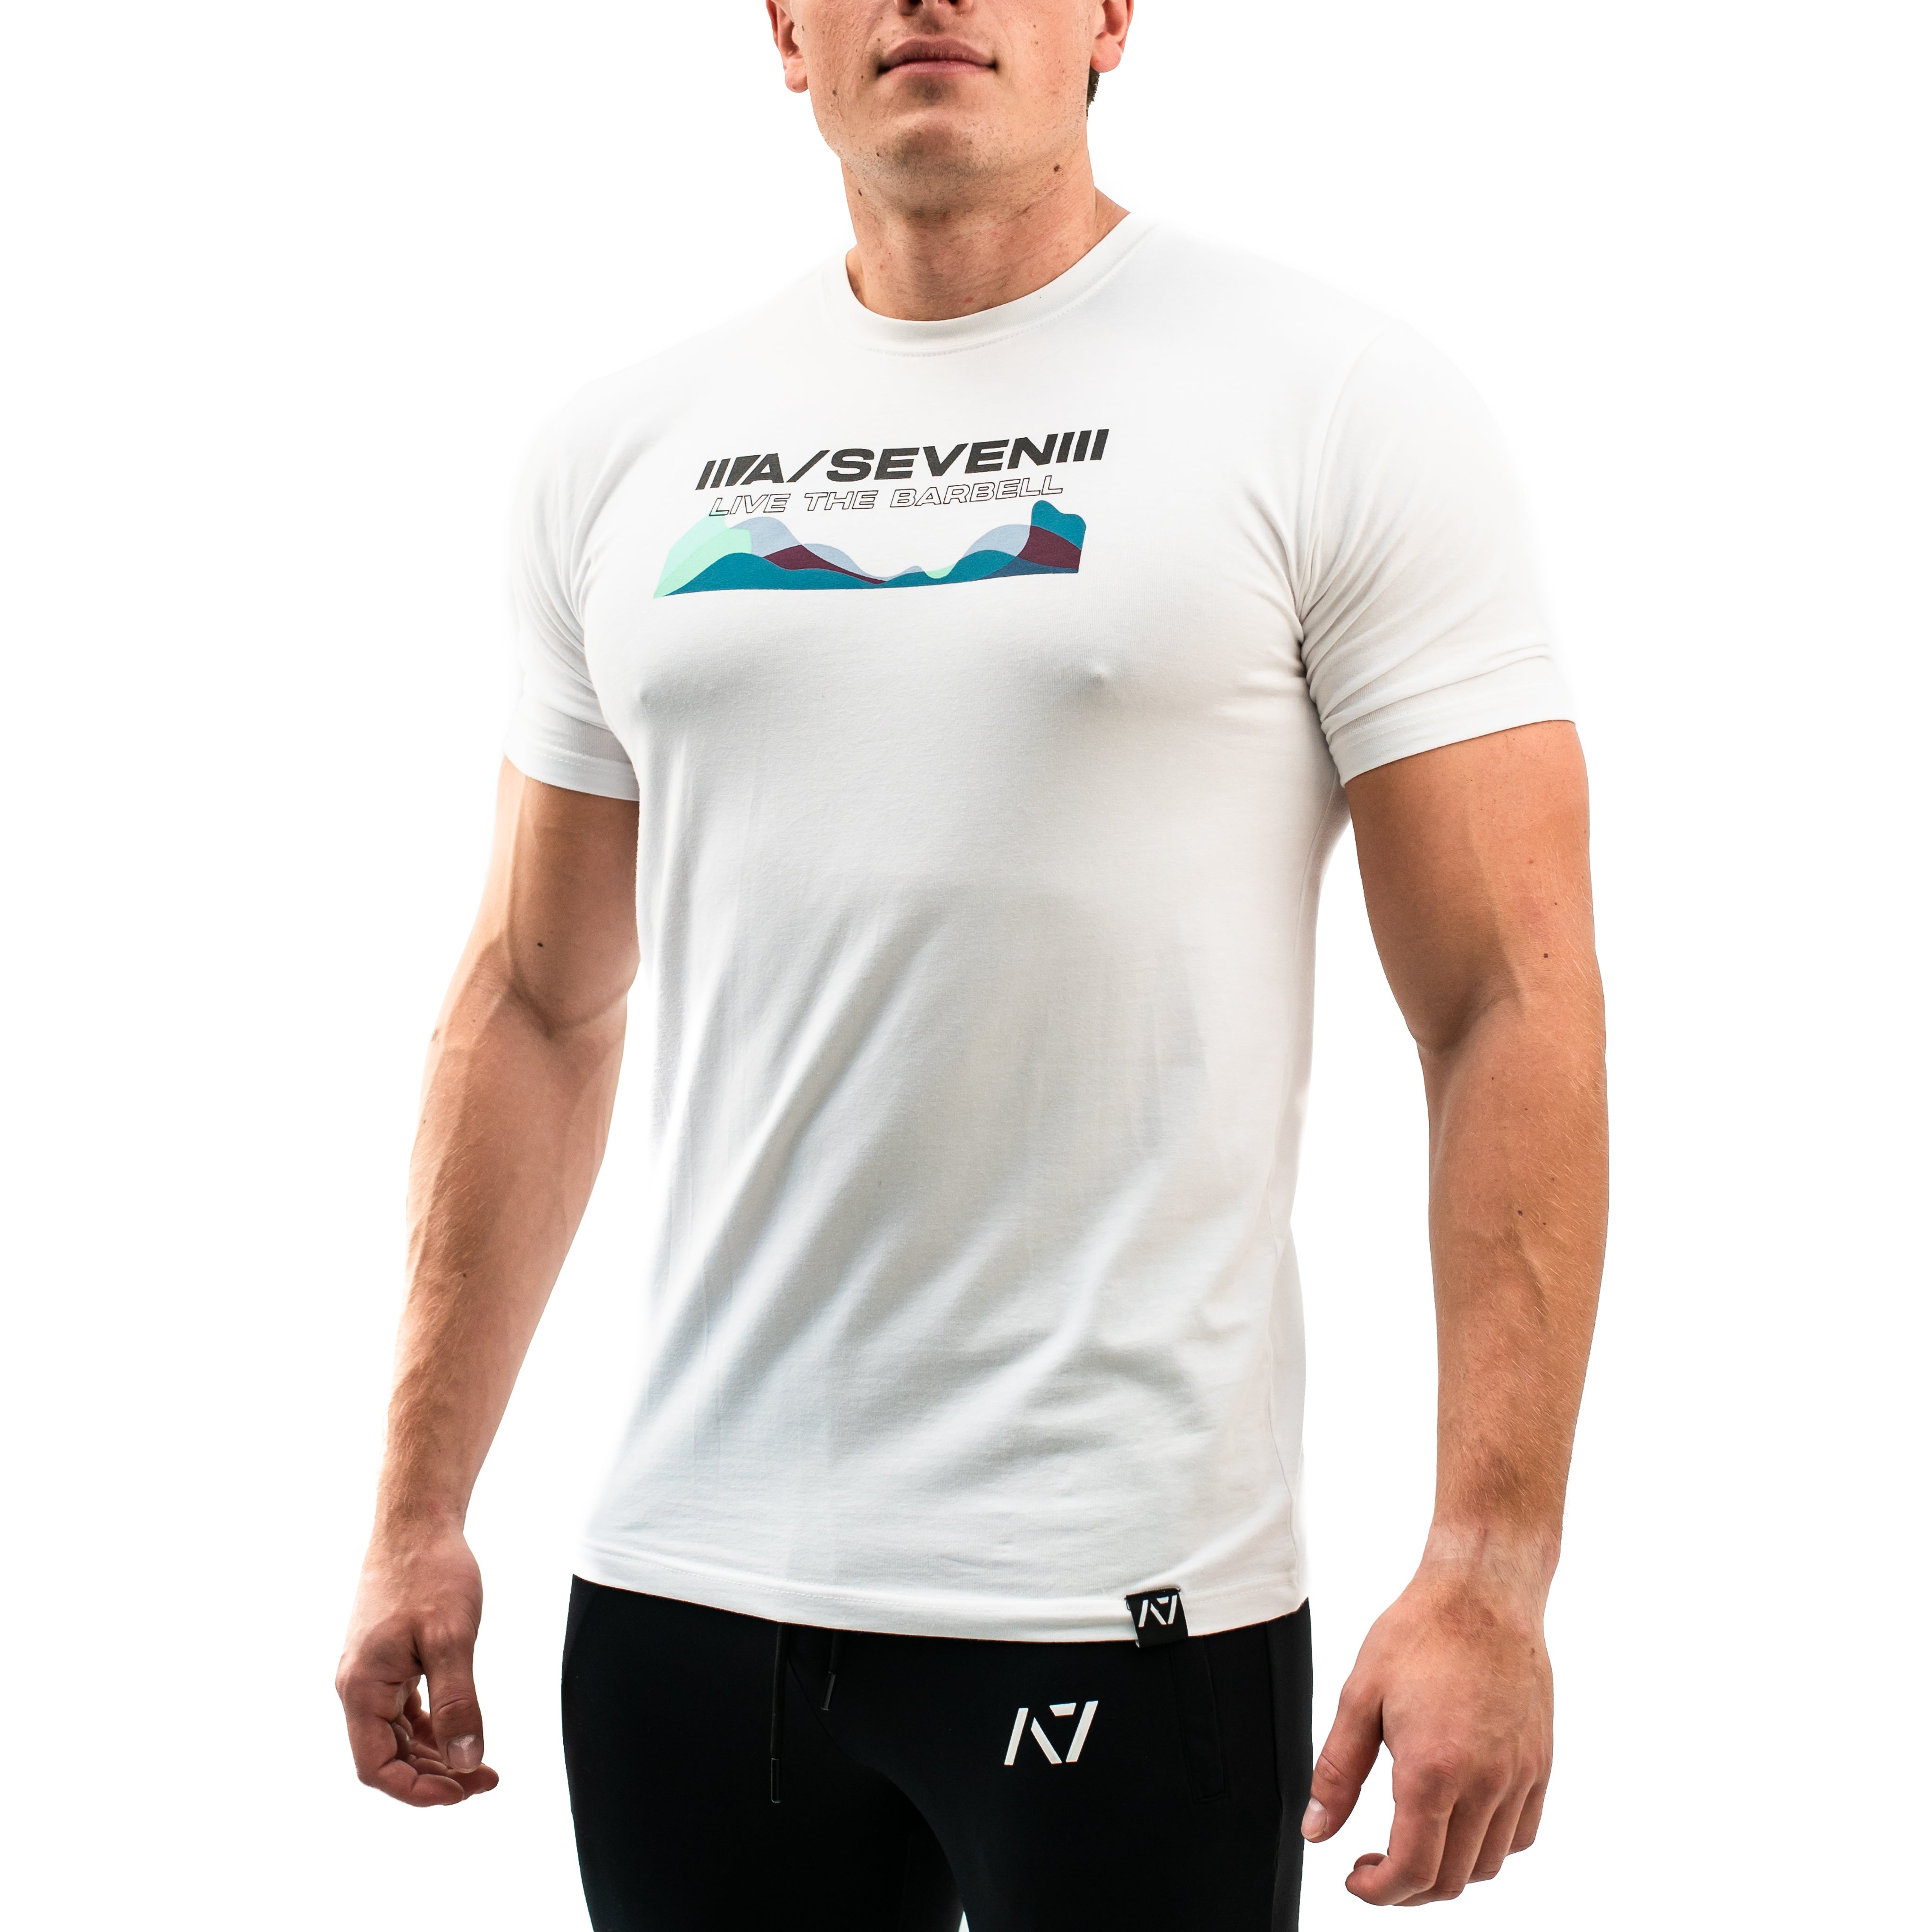 LTB Tide Grip T-shirt, great as a squat shirt. Purchase LTB Tide Bar Grip t-shirt from A7 UK. Purchase LTB Tide Bar Grip Shirt Europe from A7 Europe. No more chalk and no more sliding. Best Bar Grip T shirts, shipping to UK and Europe from A7 UK. LTB Tide Bar Grip Shirt is a white bar grip with a colourful wave design on the front. A7UK has the best Powerlifting apparel for all your workouts. Available in UK and Europe including France, Italy, Germany, the Netherlands, Sweden and Poland.